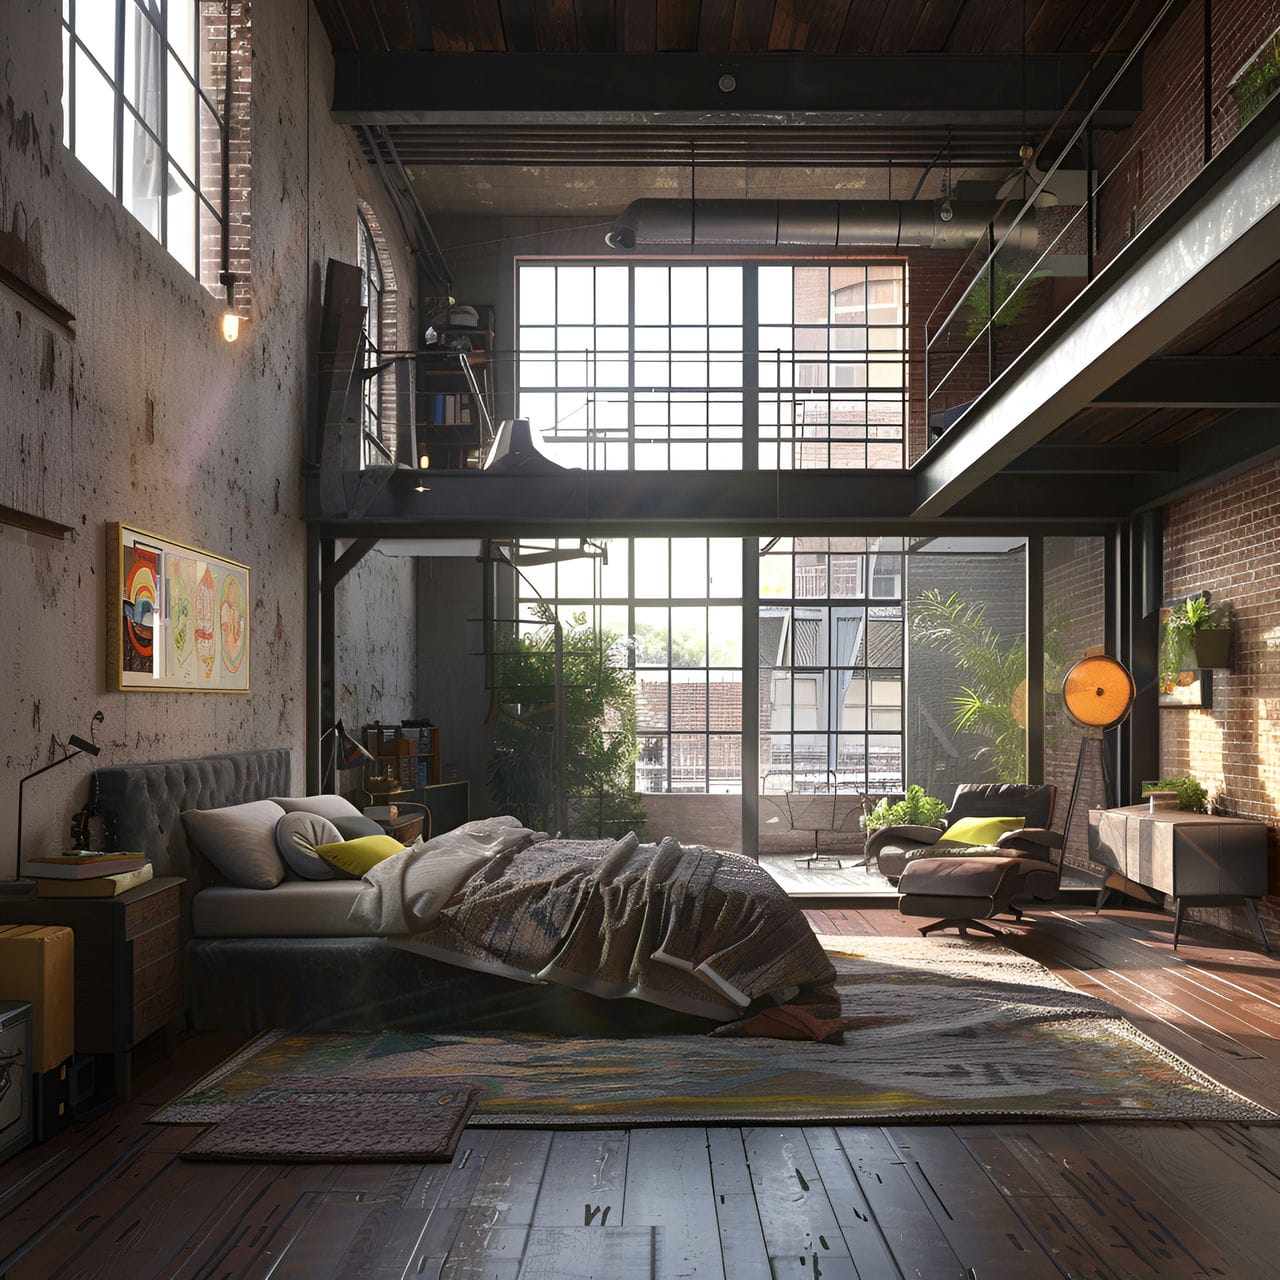 Loft: size, functionality, uses, furniture, and renovation